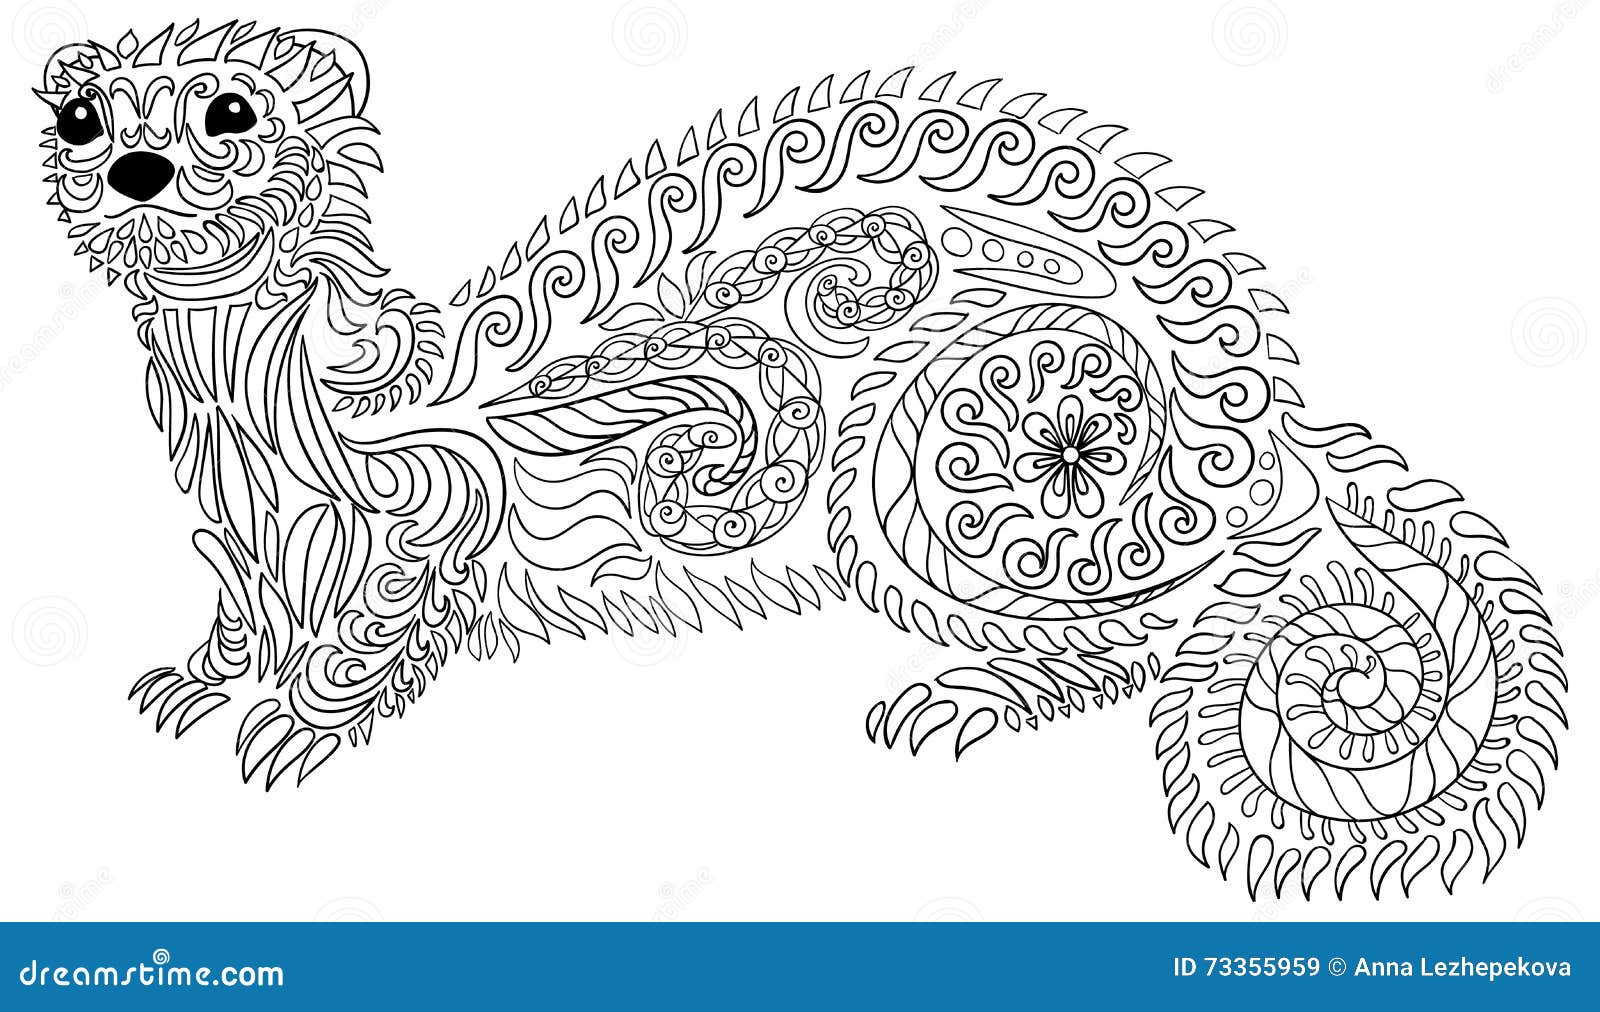 Ferret coloring page stock illustrations â ferret coloring page stock illustrations vectors clipart